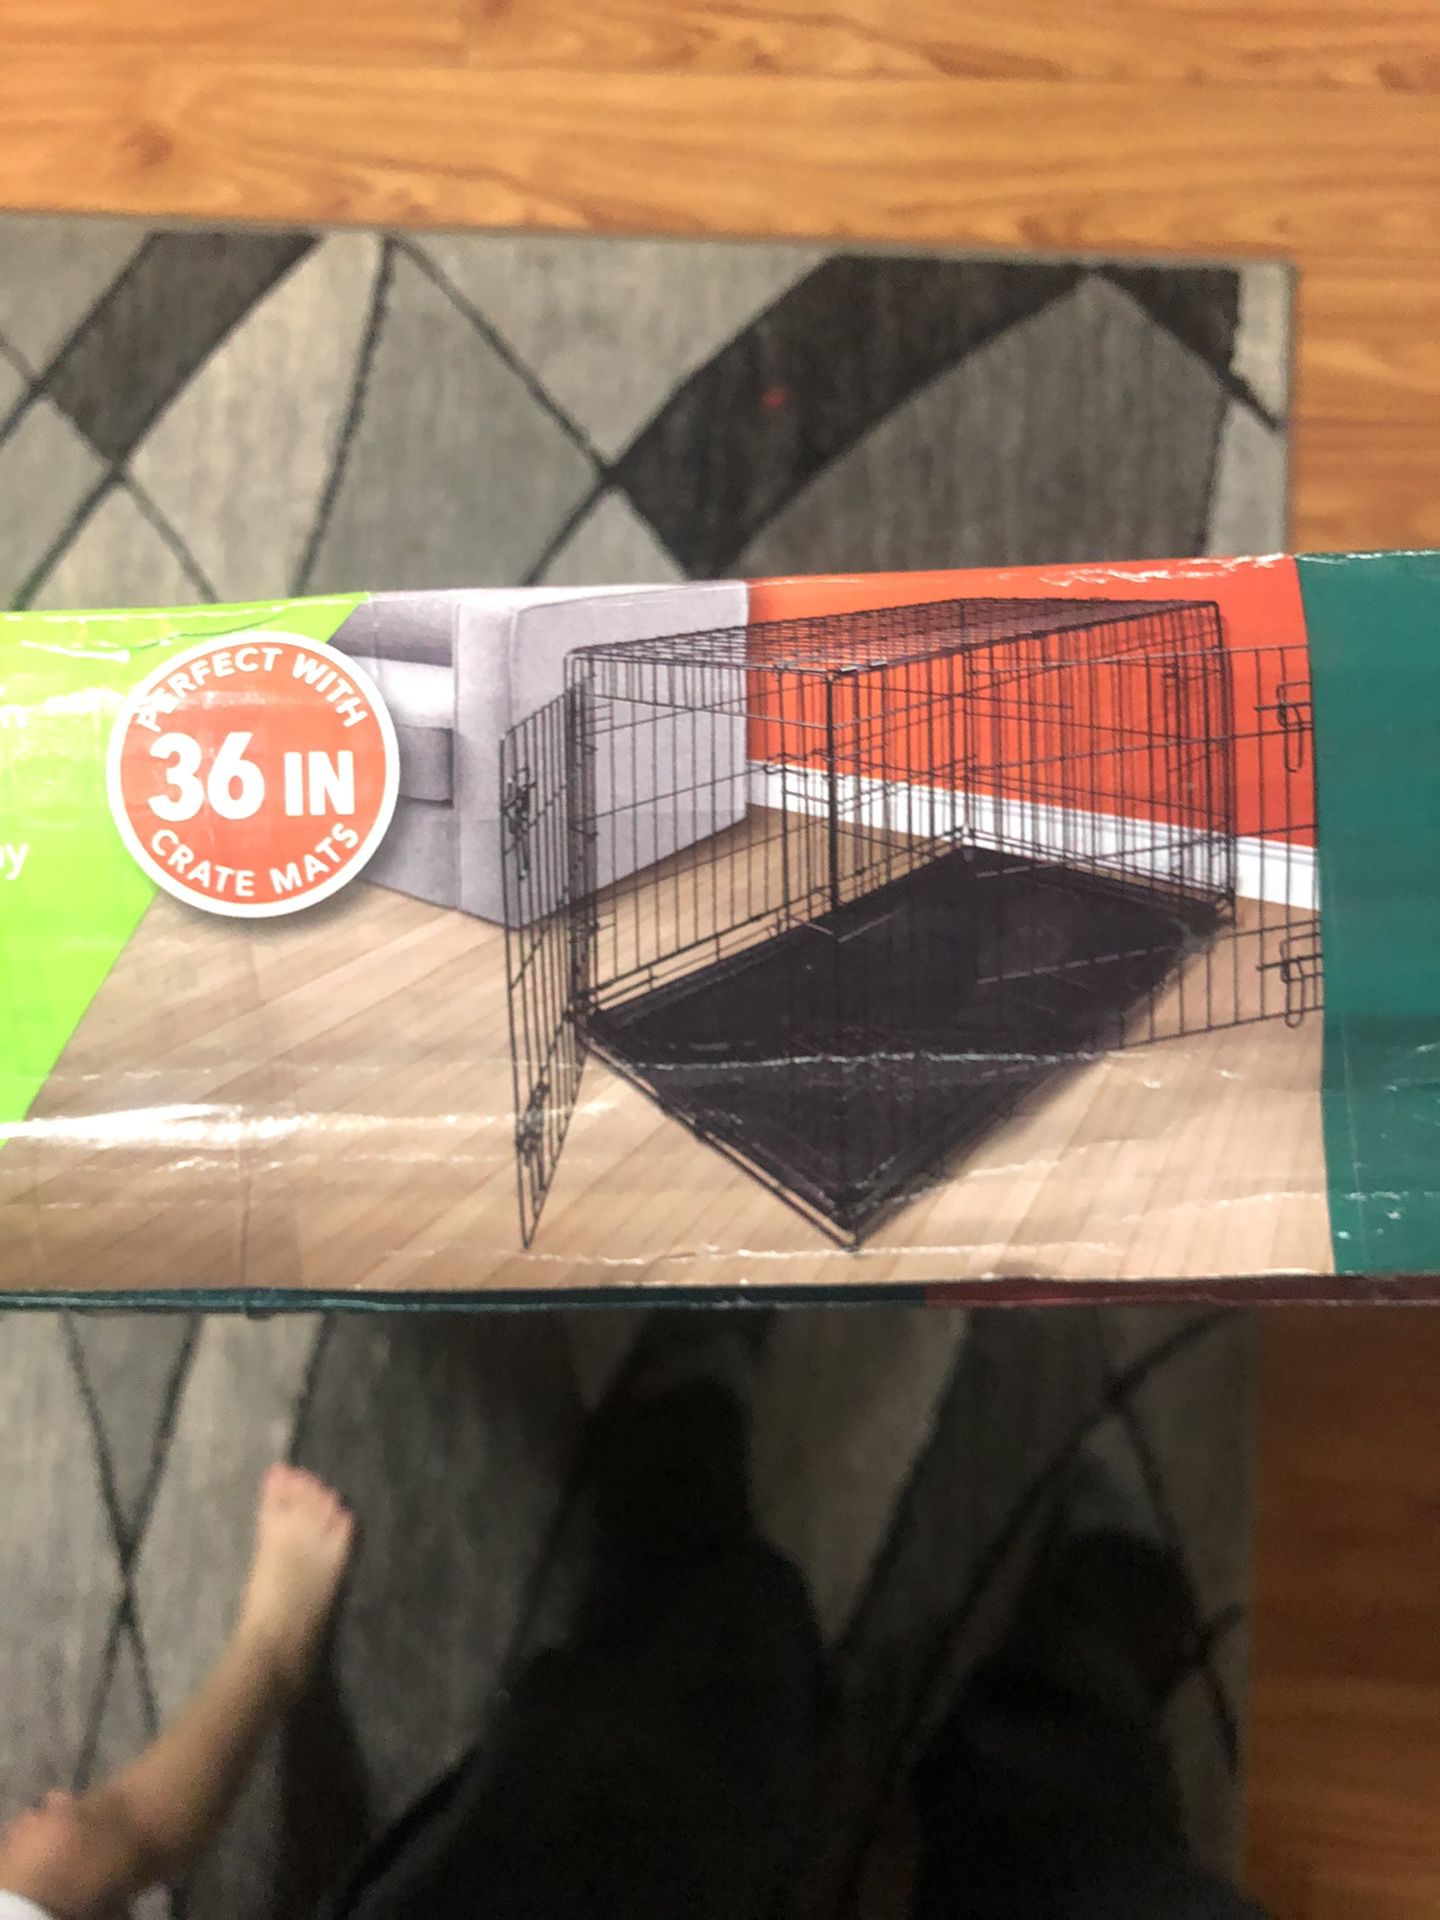 Large dog training crate/ kennel